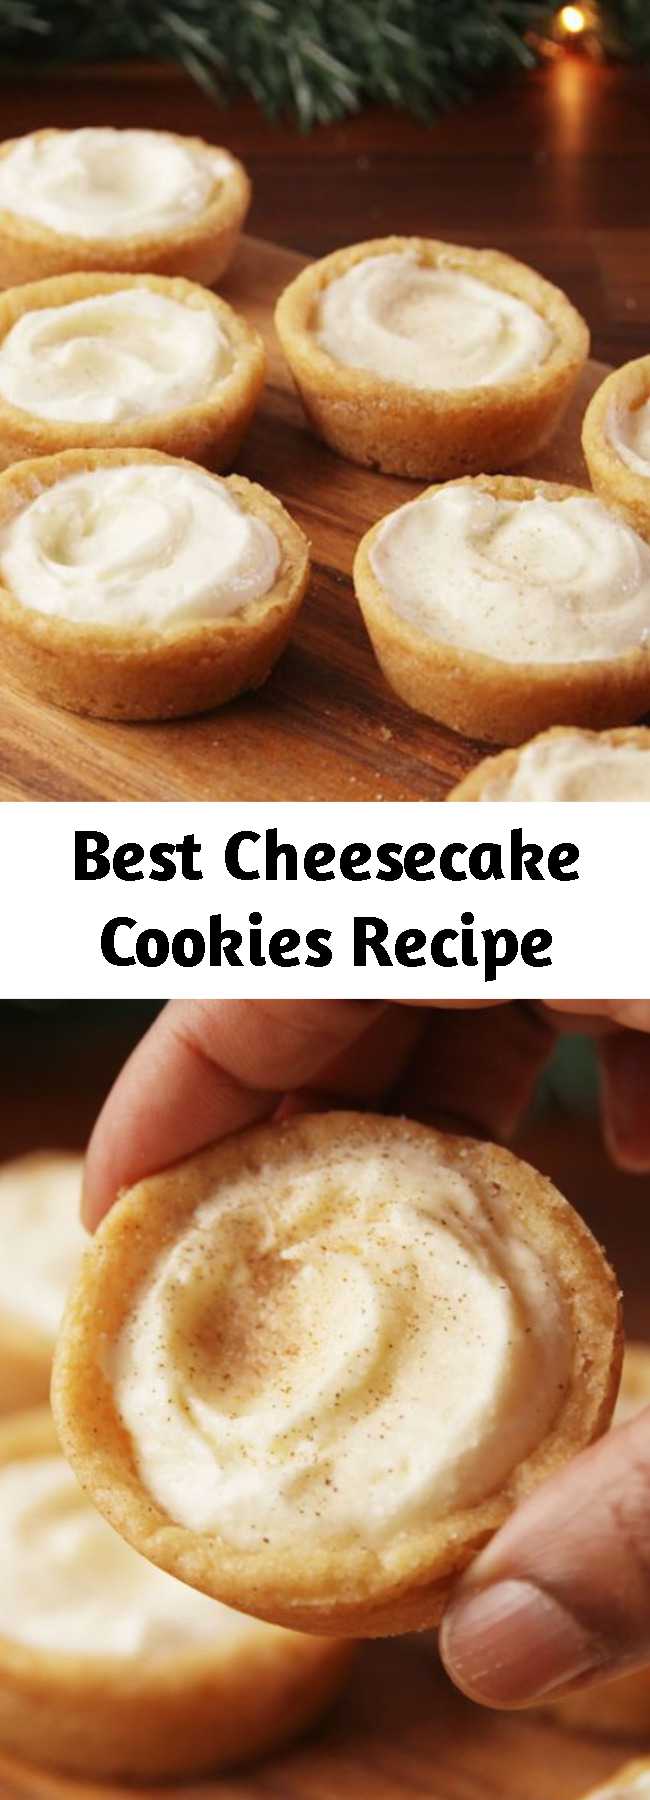 Best Cheesecake Cookies Recipe - Small bites of heaven. #food #pastryporn #holiday #christmas #easyrecipe #recipe #kids #ideas #inspiration #hacks